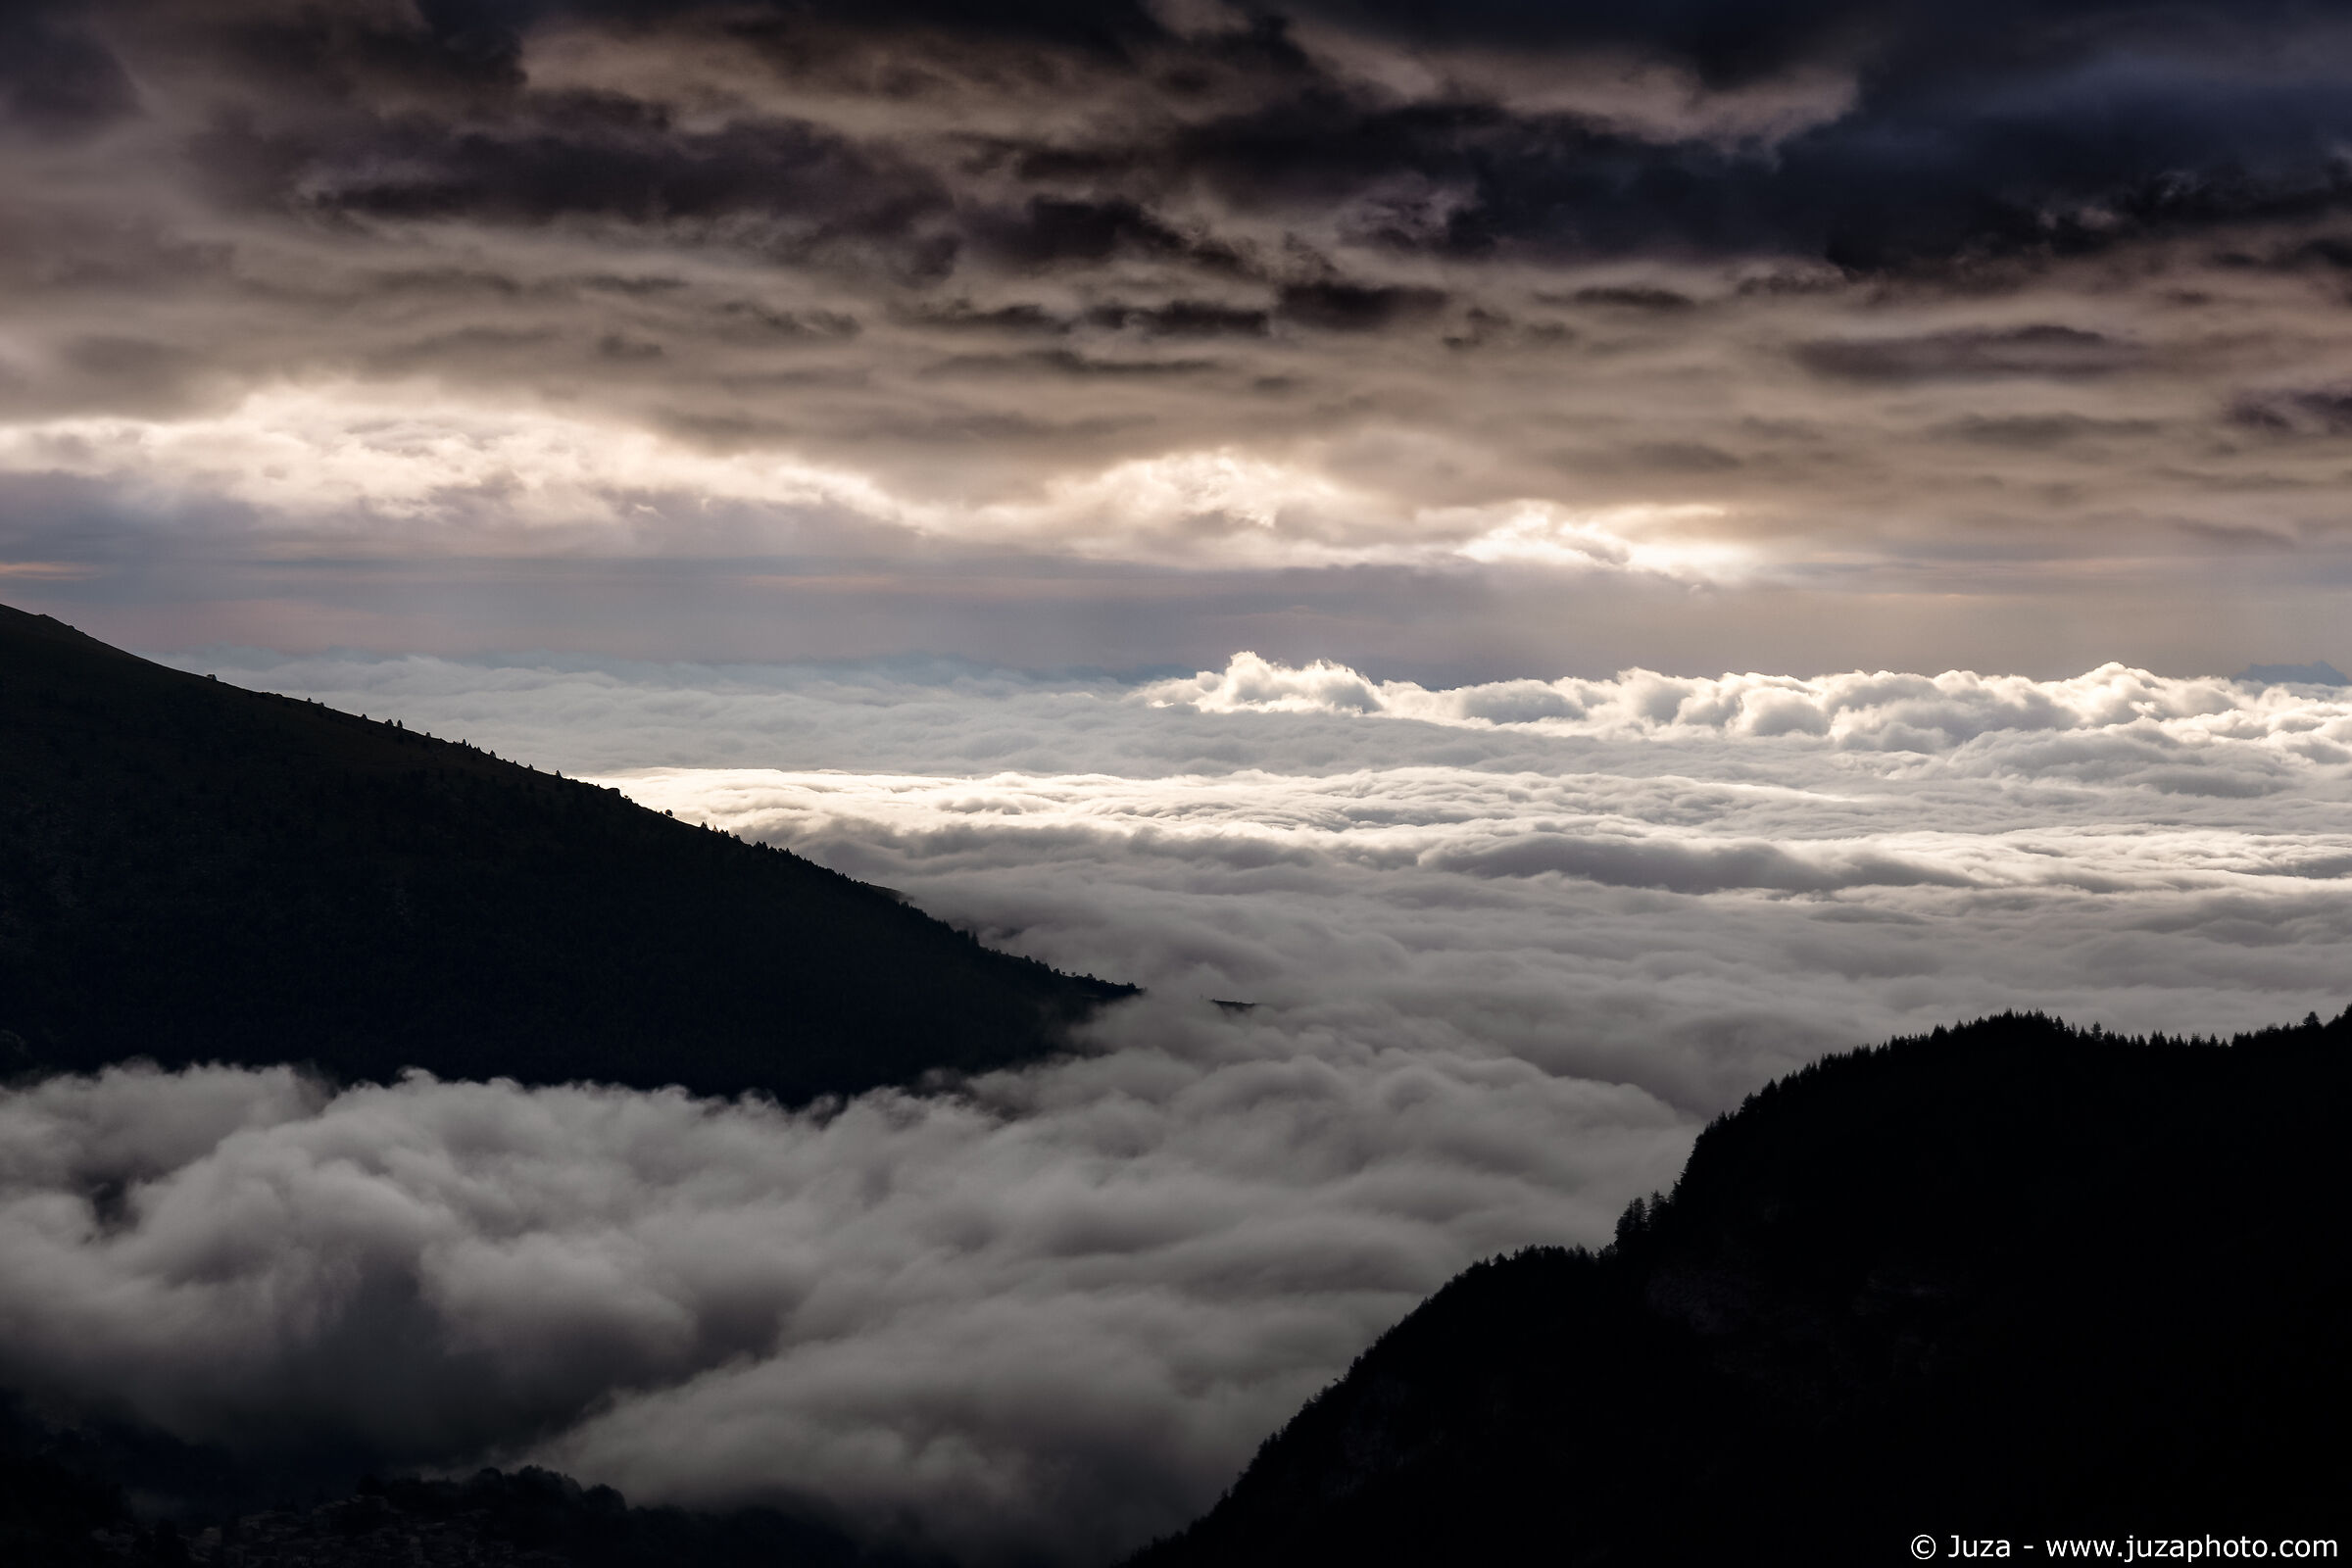 Storm on the sea of clouds...